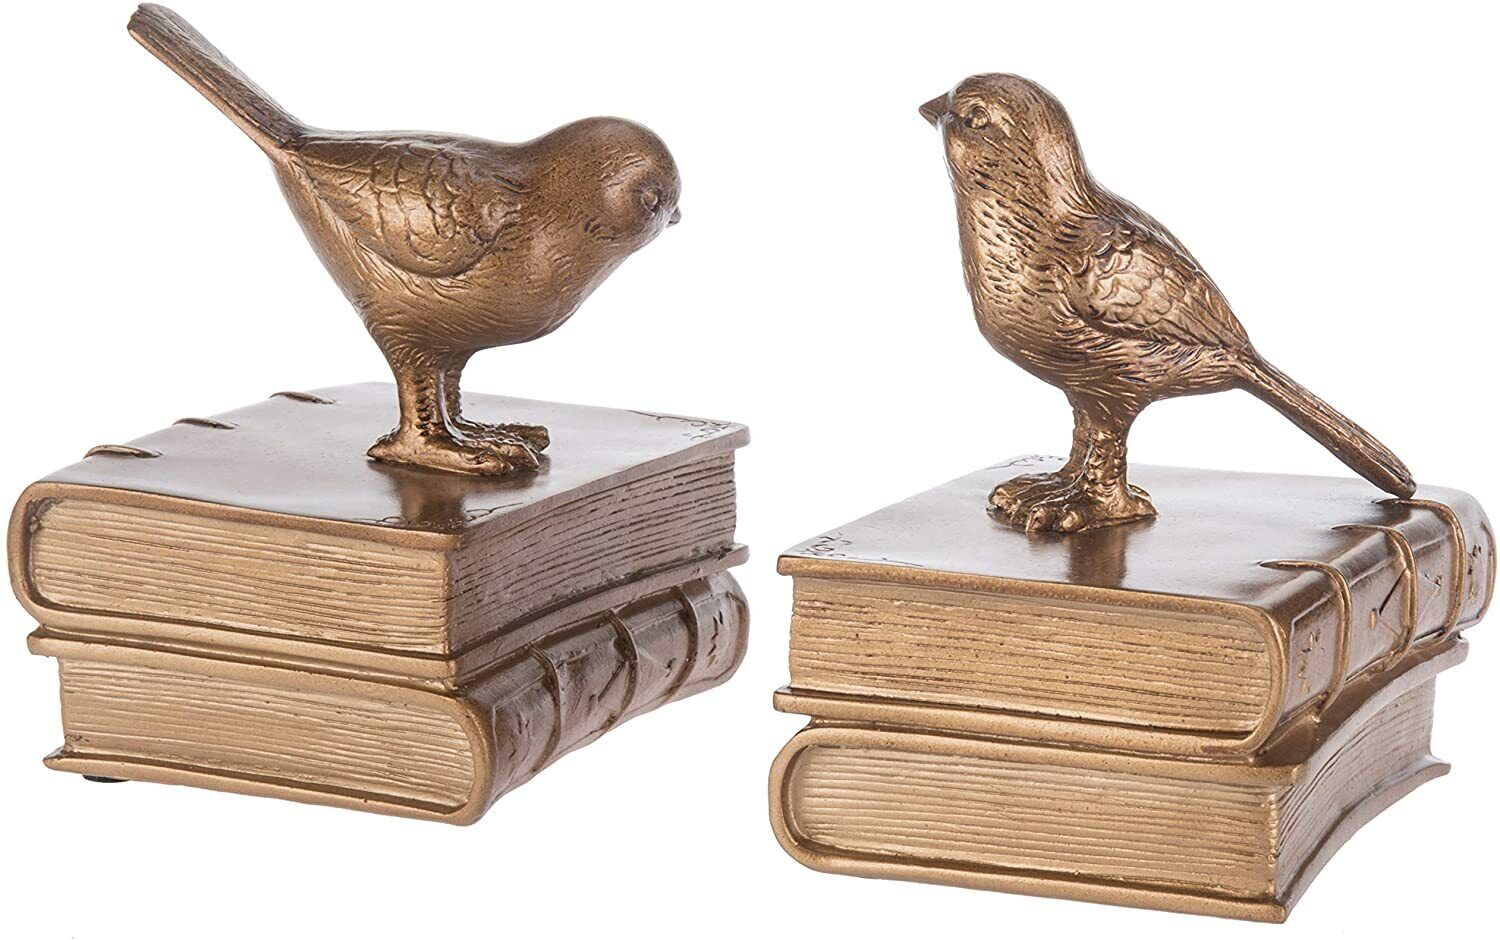 Vintage Lustrous Decorative Birds & Books Brass-Colored Resin Bookends, 1 Pair